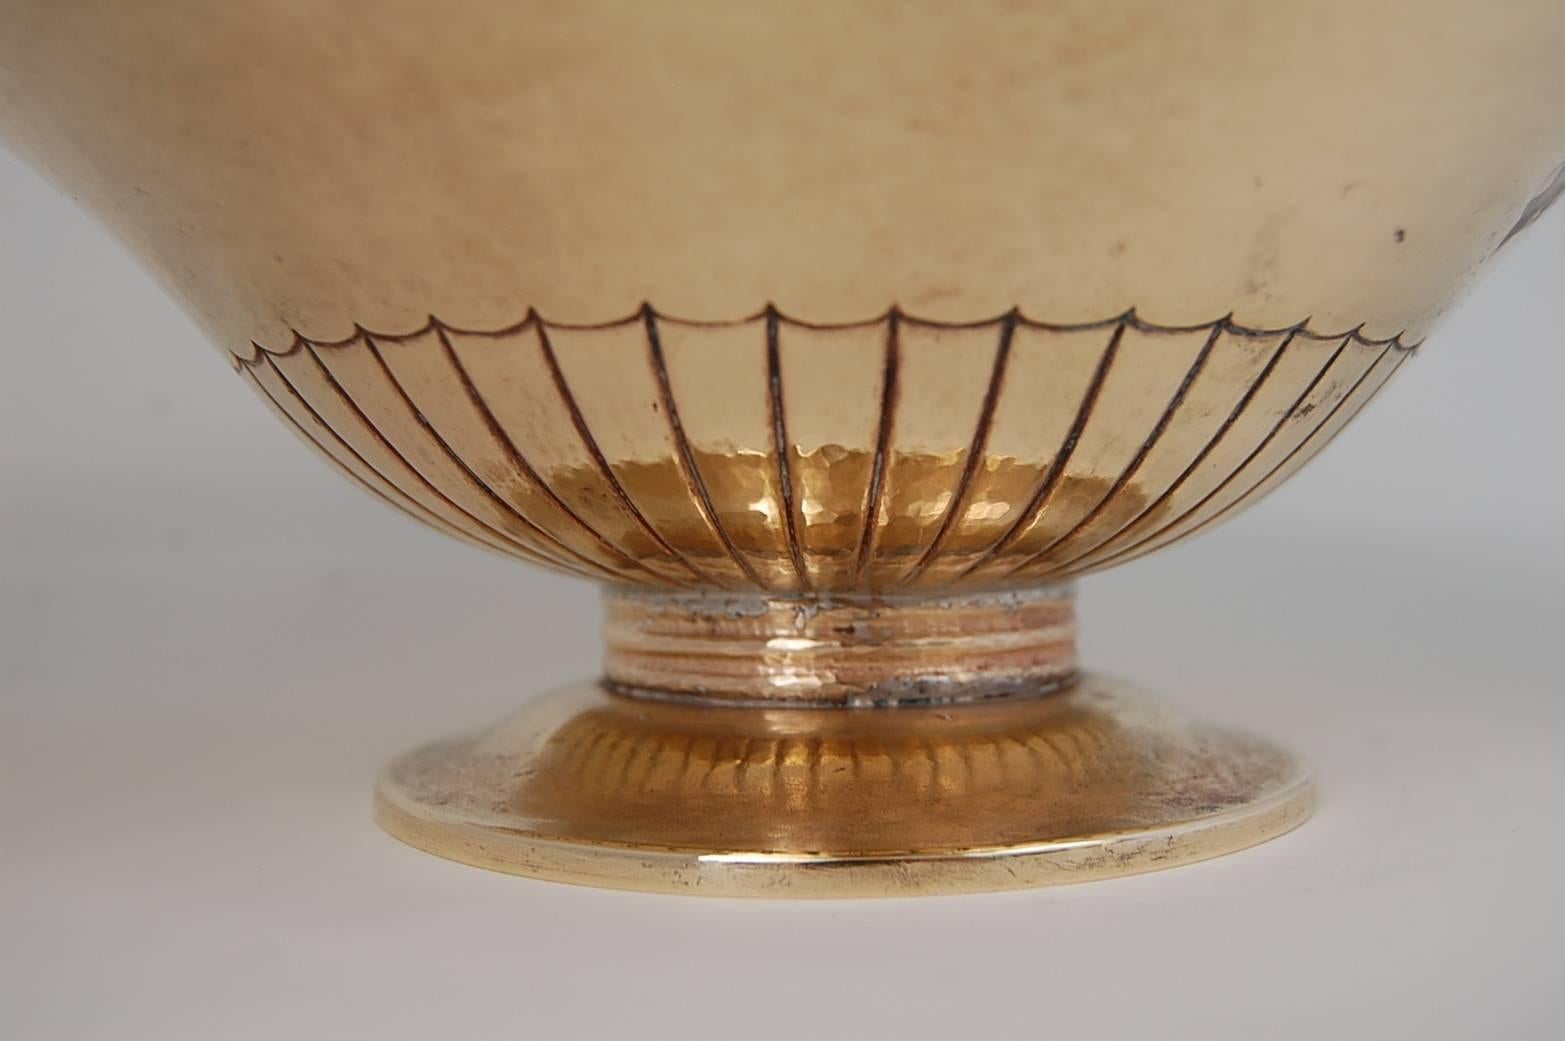 Museum quality bronze bowl by Master Metal-smith A. Dragsted of Copenhagen, Denmark, circa 1939. Fully signed. The craftsmanship on this piece is astounding. The scalloping to the exterior of the bowl transfers through to the interior in a much more